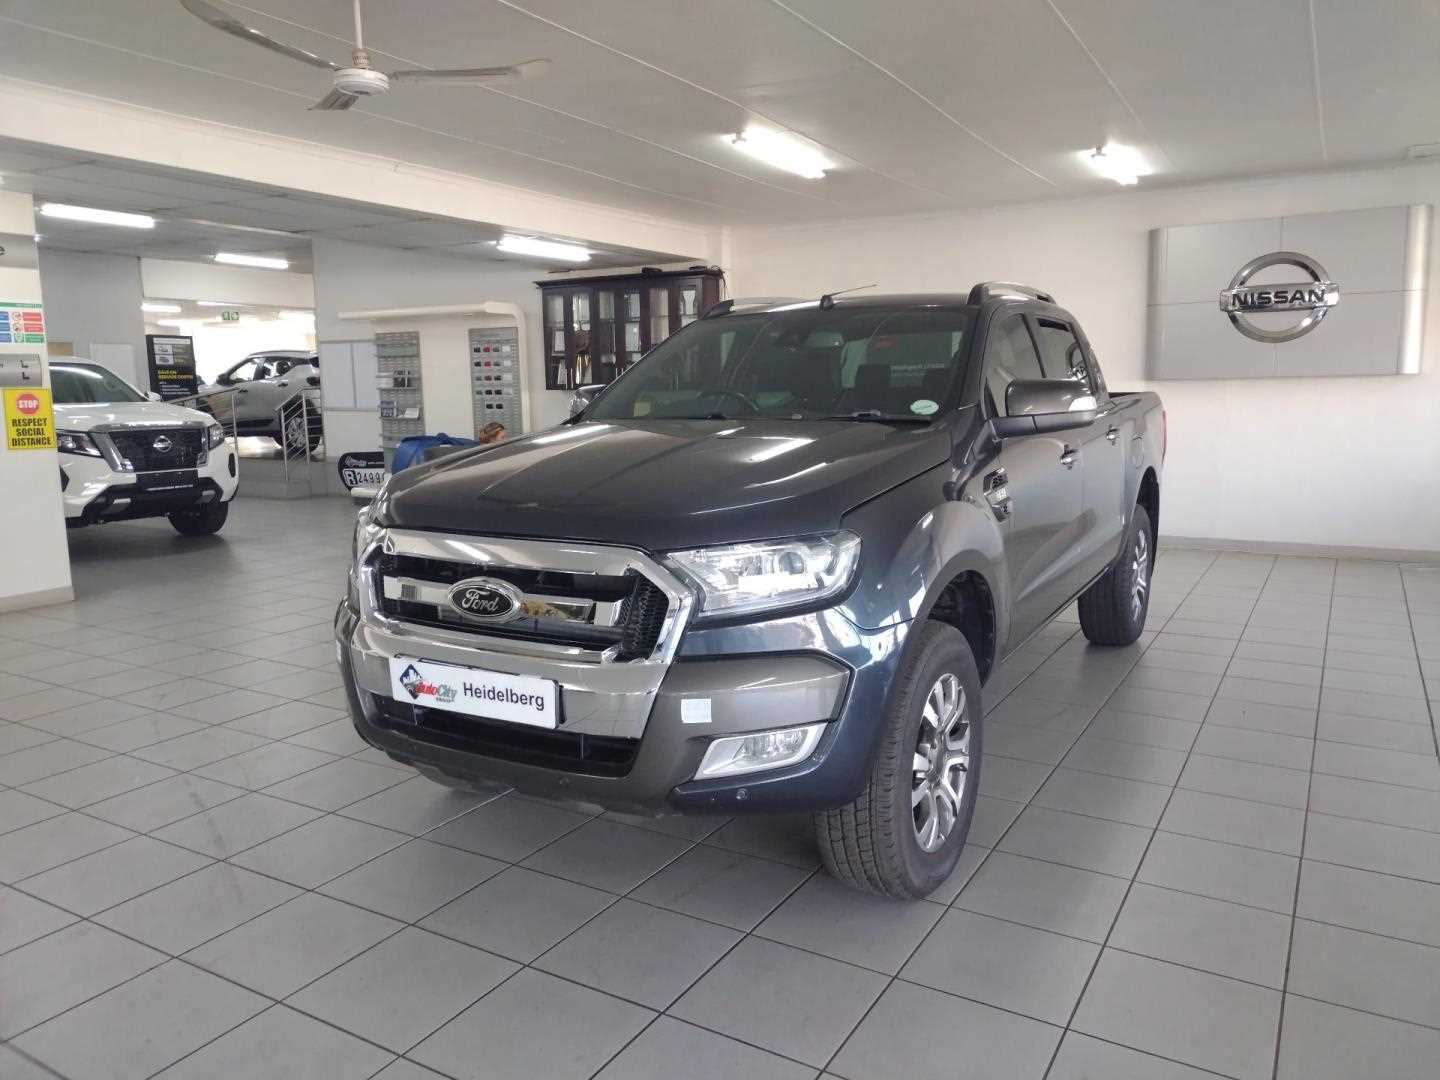 FORD RANGER 3.2TDCi 3.2 WILDTRAK 4X4 A/T P/U D/C for Sale in South Africa